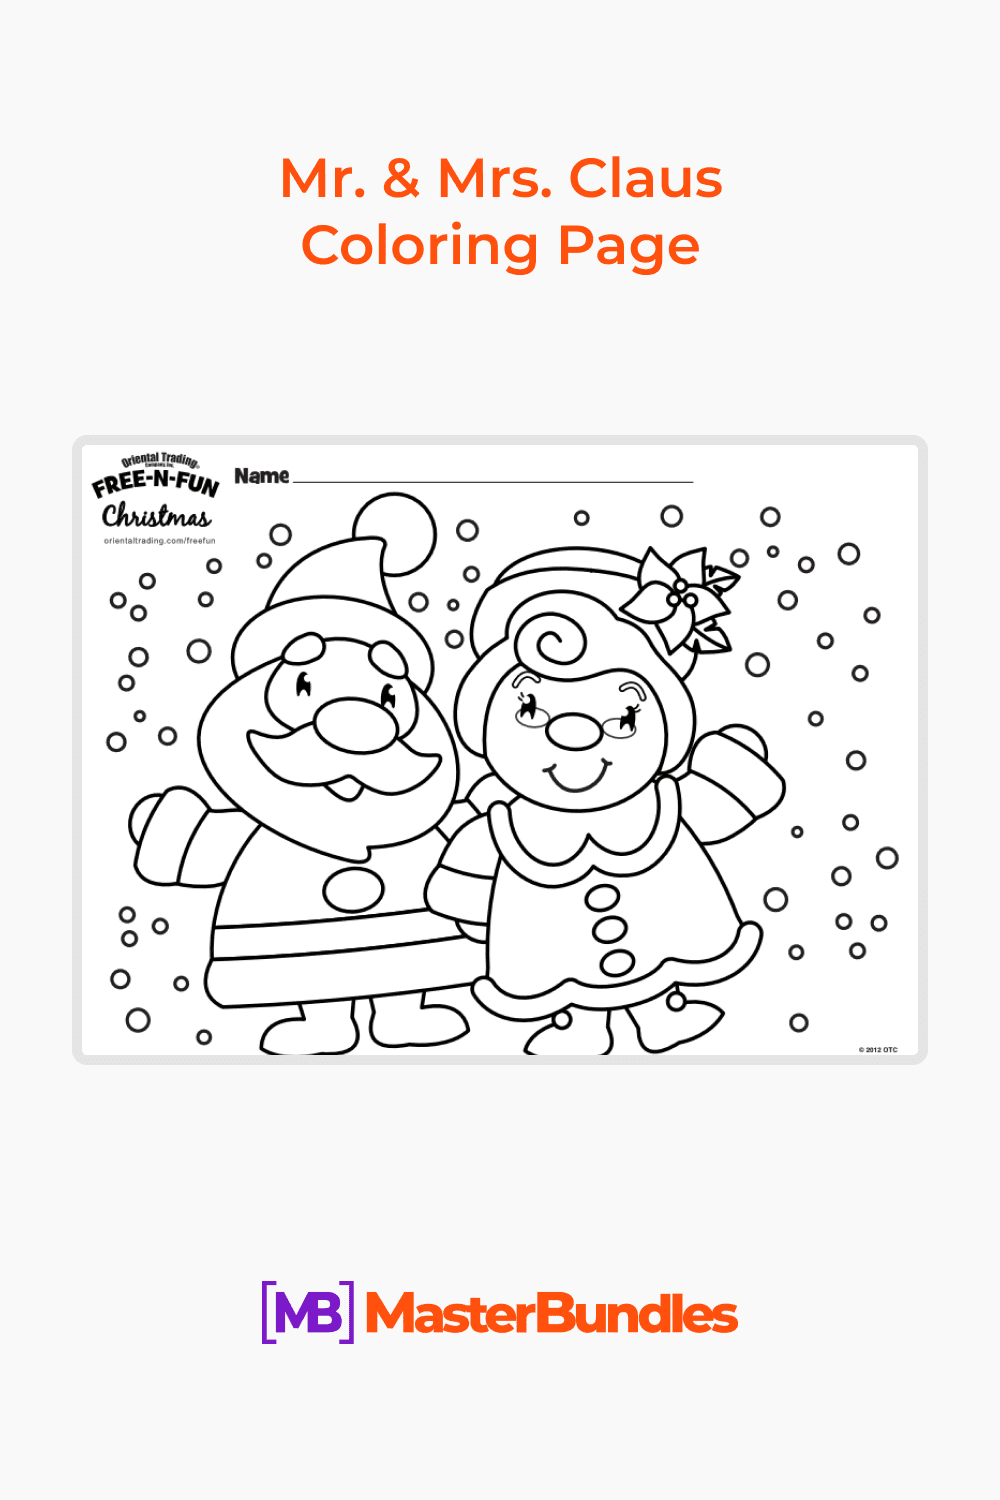 Mr Mrs Claus coloring page pinterest image.